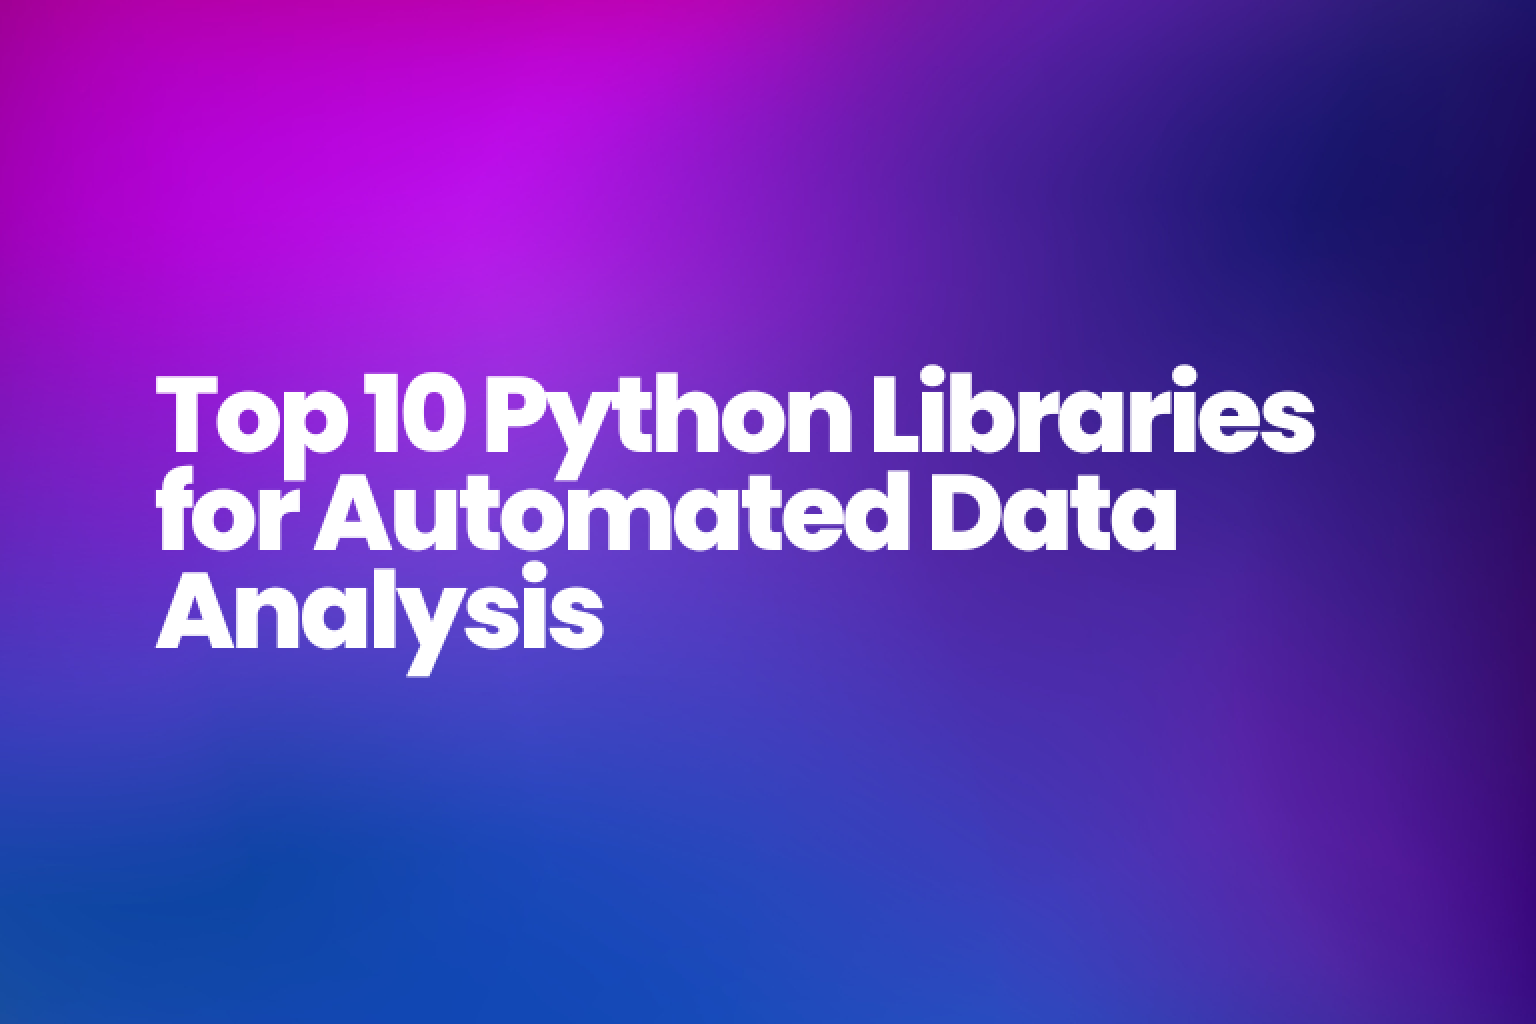 A comprehensive guide to the most essential Python libraries for automating data analysis tasks and extracting insights from large data sets.